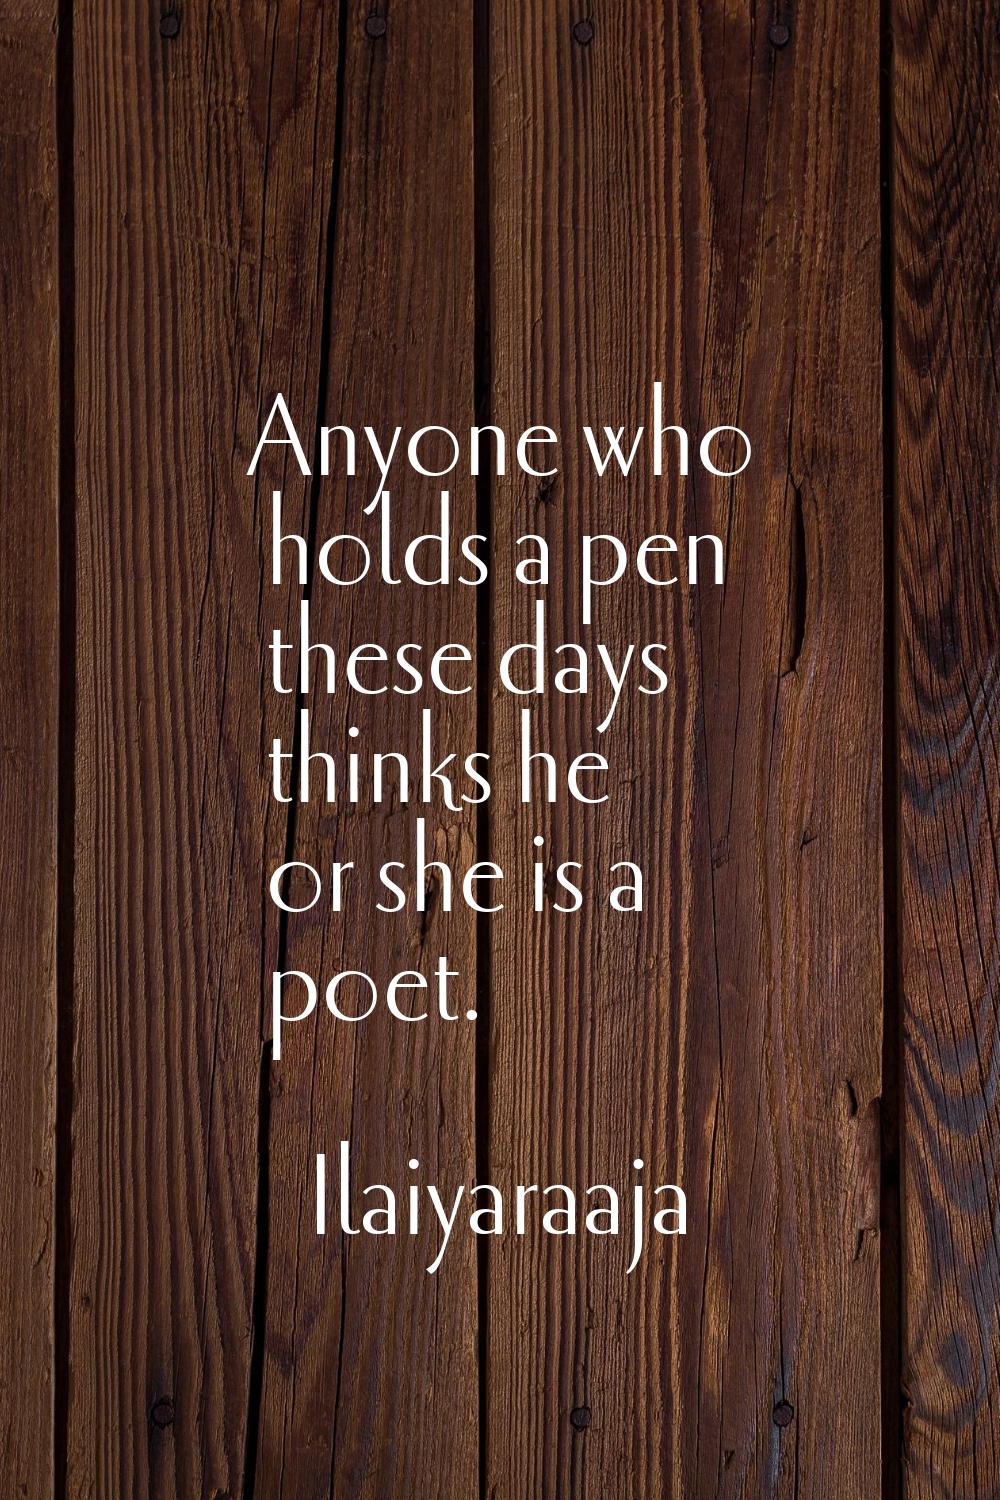 Anyone who holds a pen these days thinks he or she is a poet.